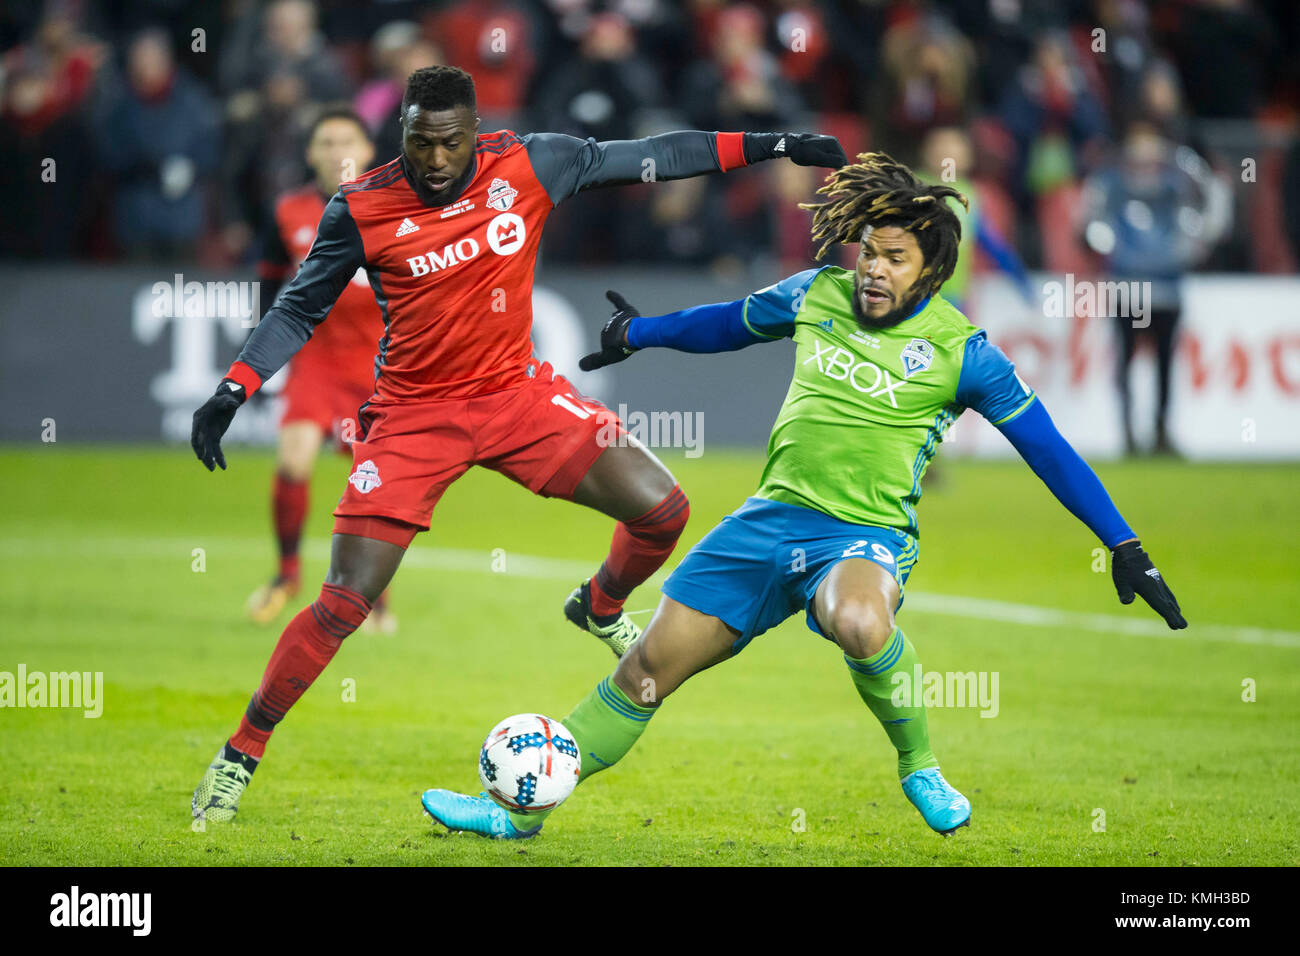 Toronto, Canada. 9th Dec, 2017. Jozy Altidore(L) of Toronto FC vies with Roman Torres(R) of Seattle Sounders FC during their 2017 Major League Soccer(MLS) Cup final at BMO Field in Toronto, Canada, Dec. 9, 2017. Toronto FC won 2-0 and claimed the title. Credit: Zou Zheng/Xinhua/Alamy Live News Stock Photo